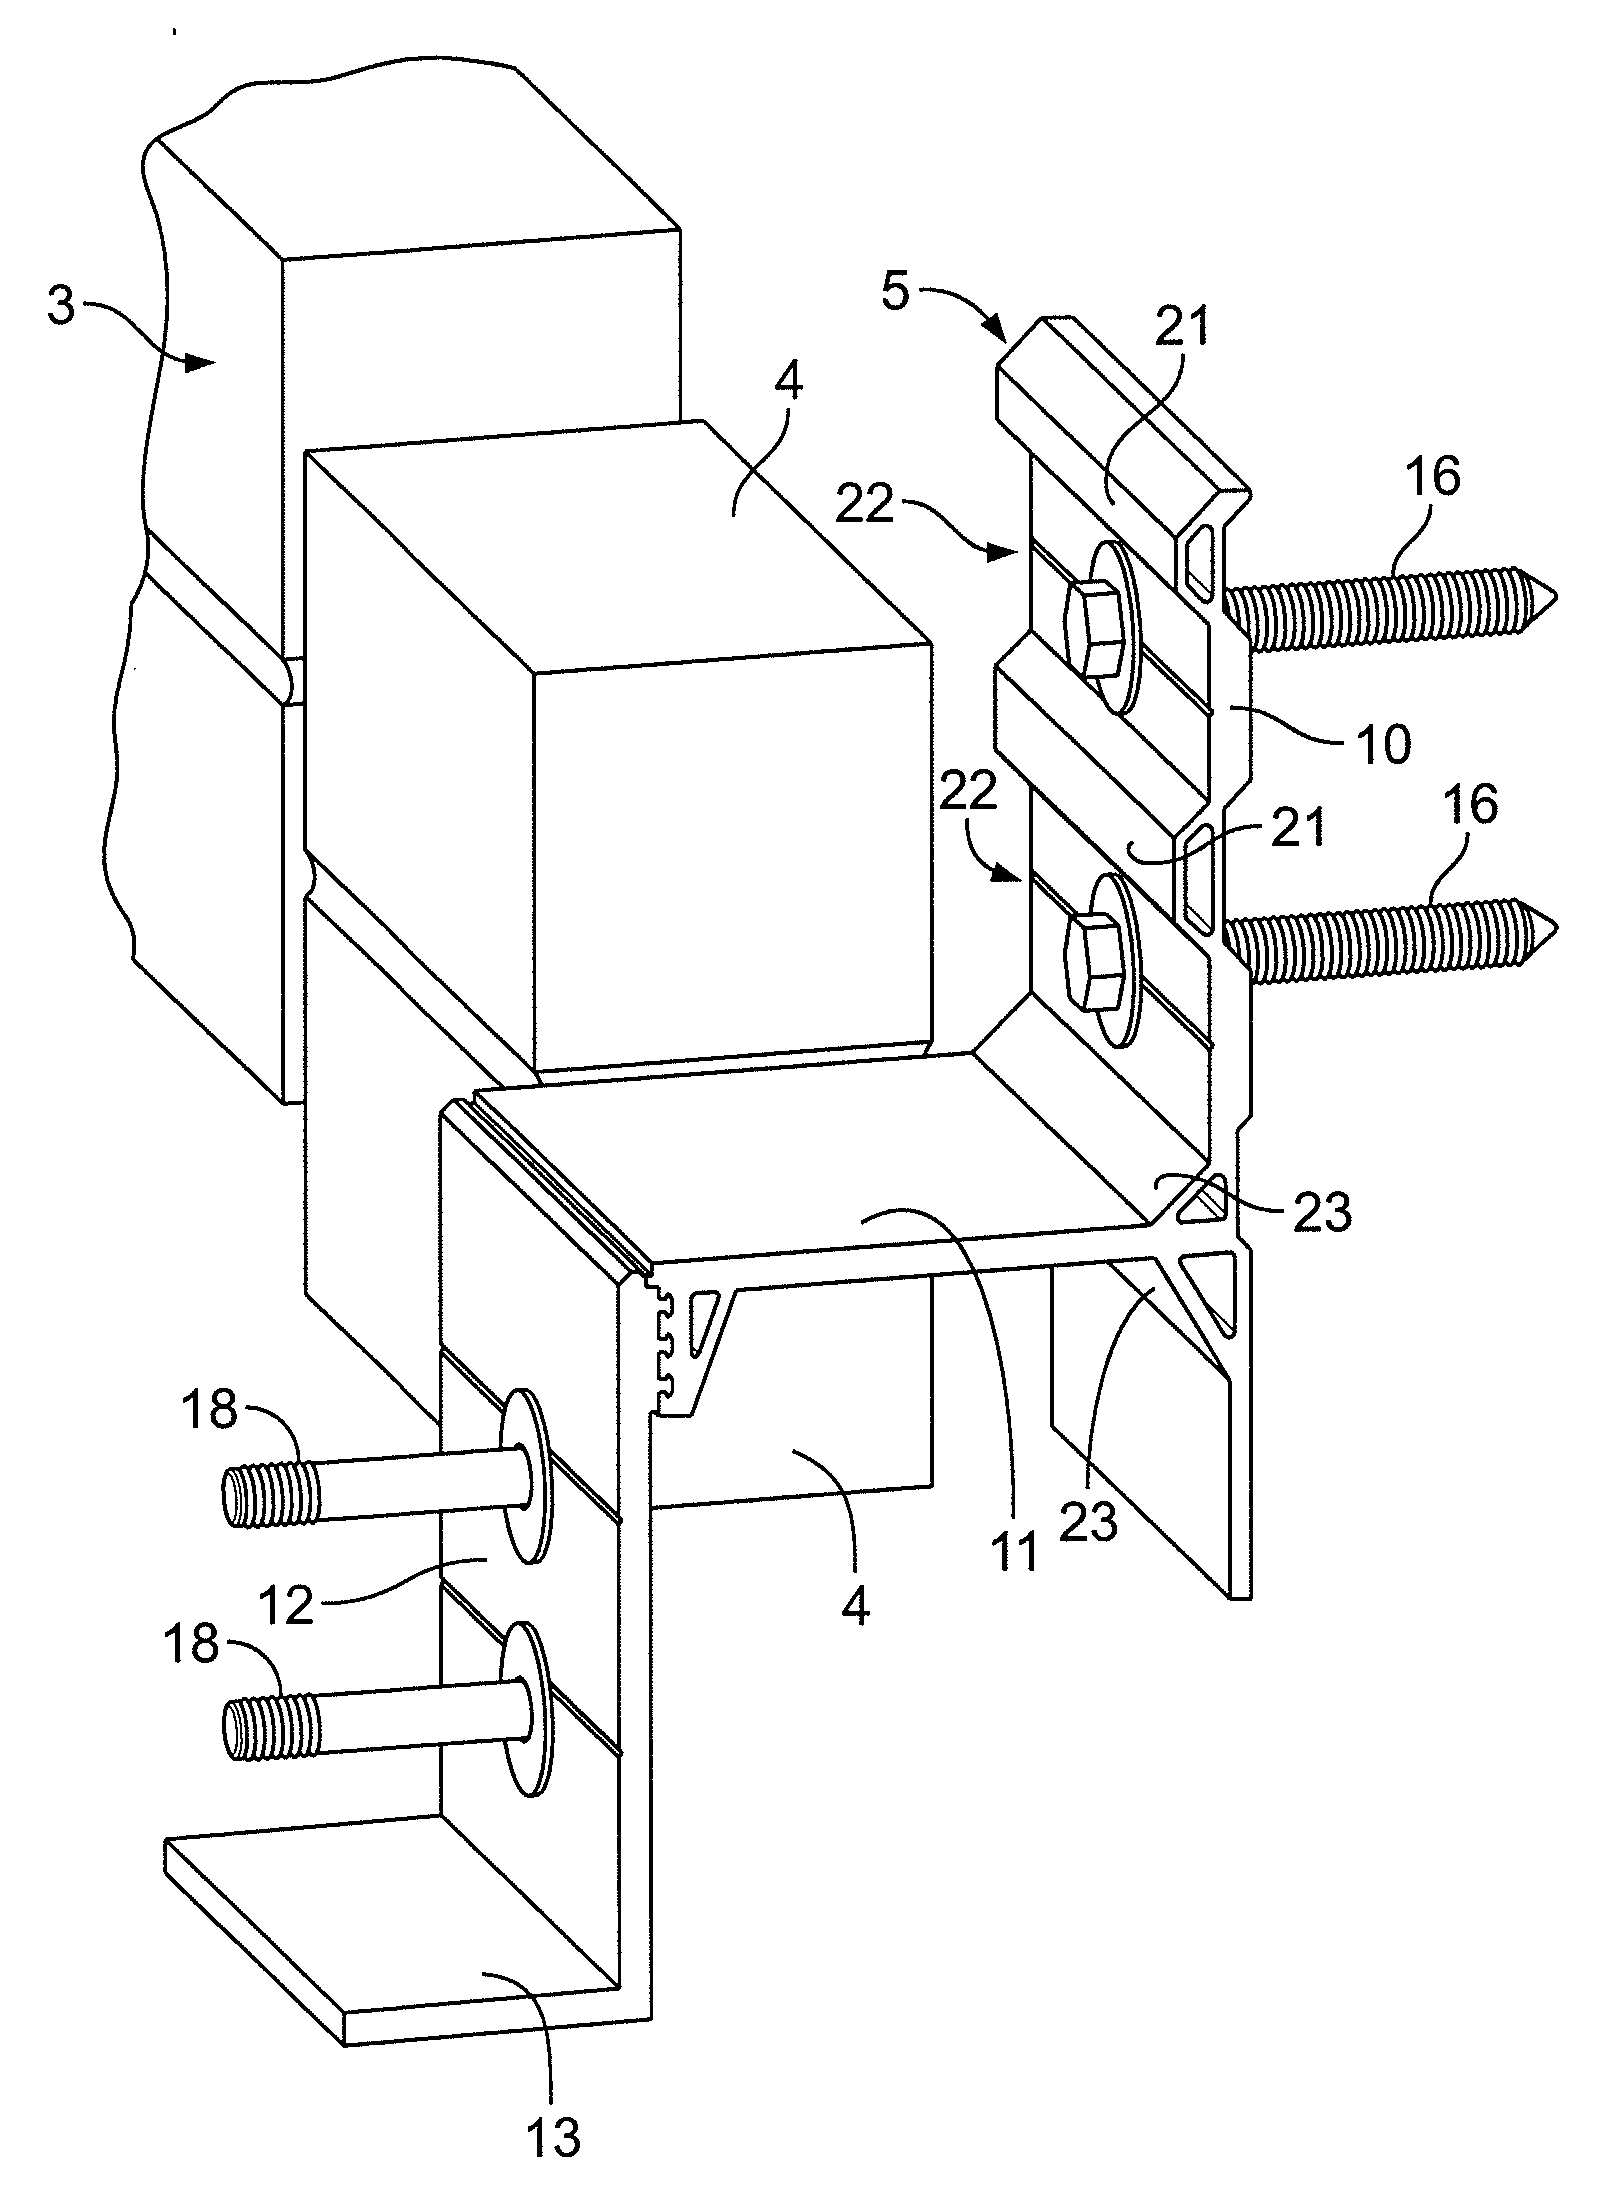 Brick bracket for installation of a ledger on the brick facing or veneer of a structure and associated methods for the installation of the brick bracket on the brick facing